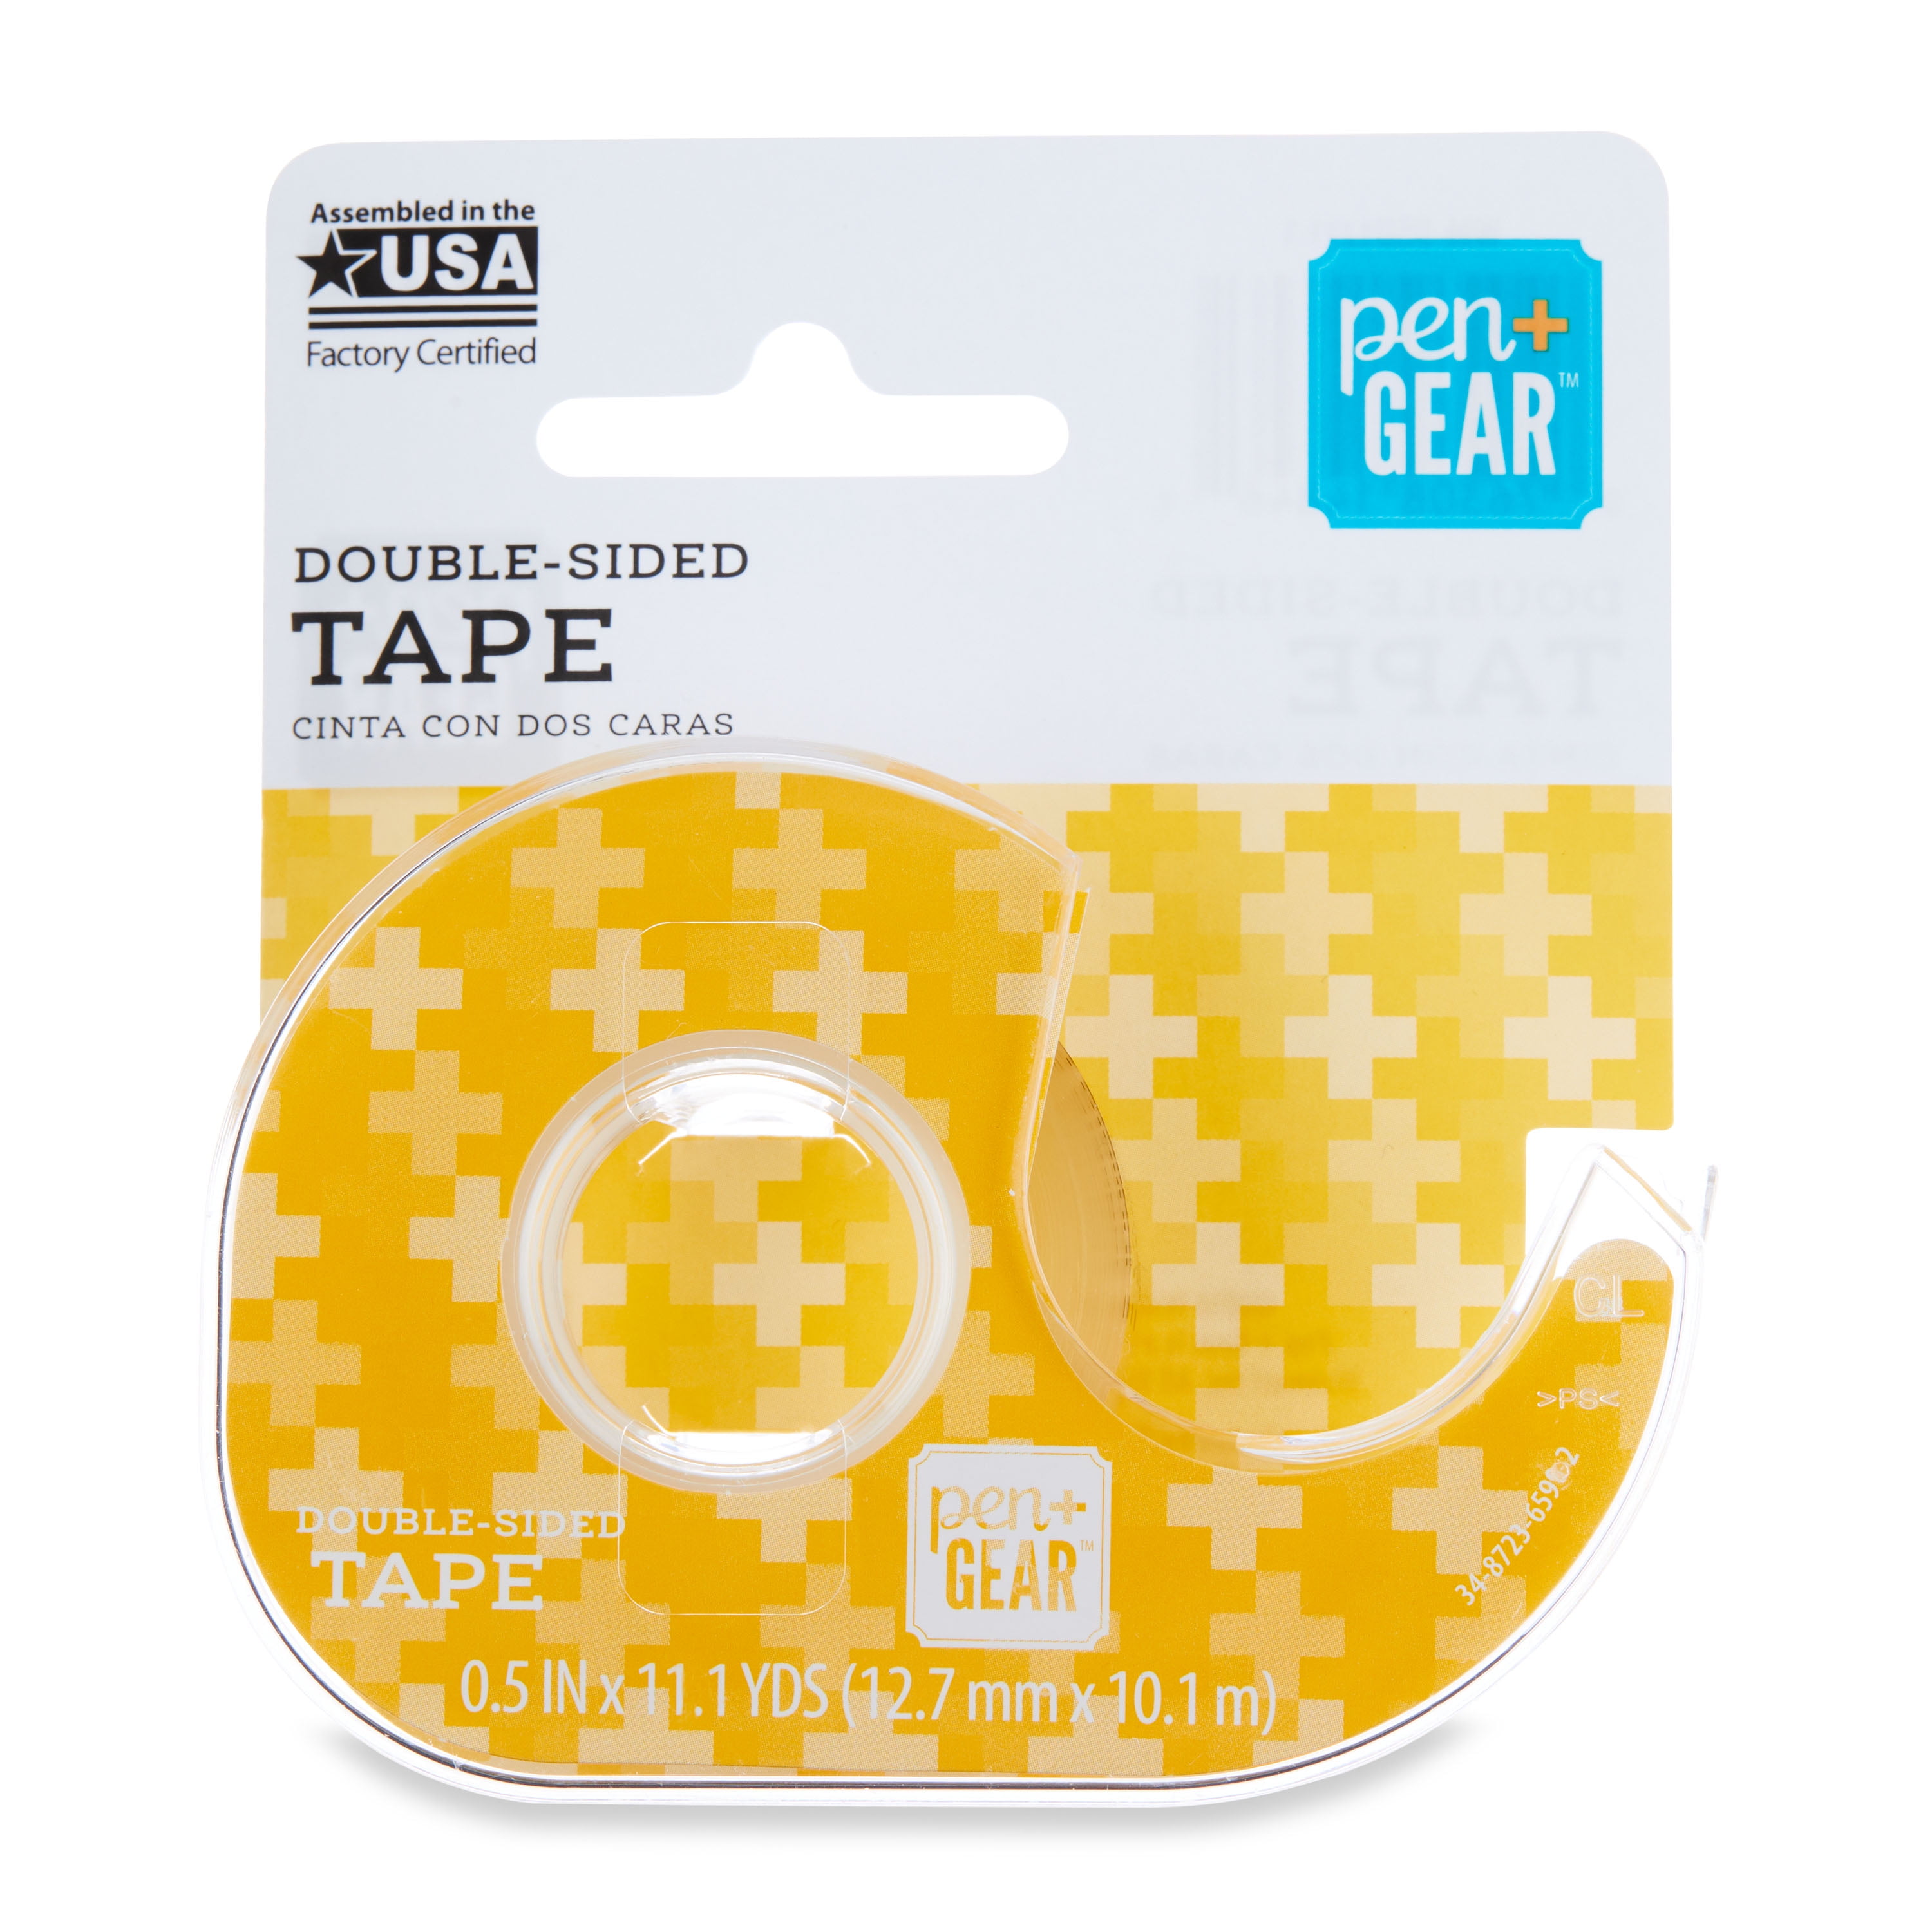 Elmer's Permanent Double Sided Tape, Size: 25' x 0.5, Clear